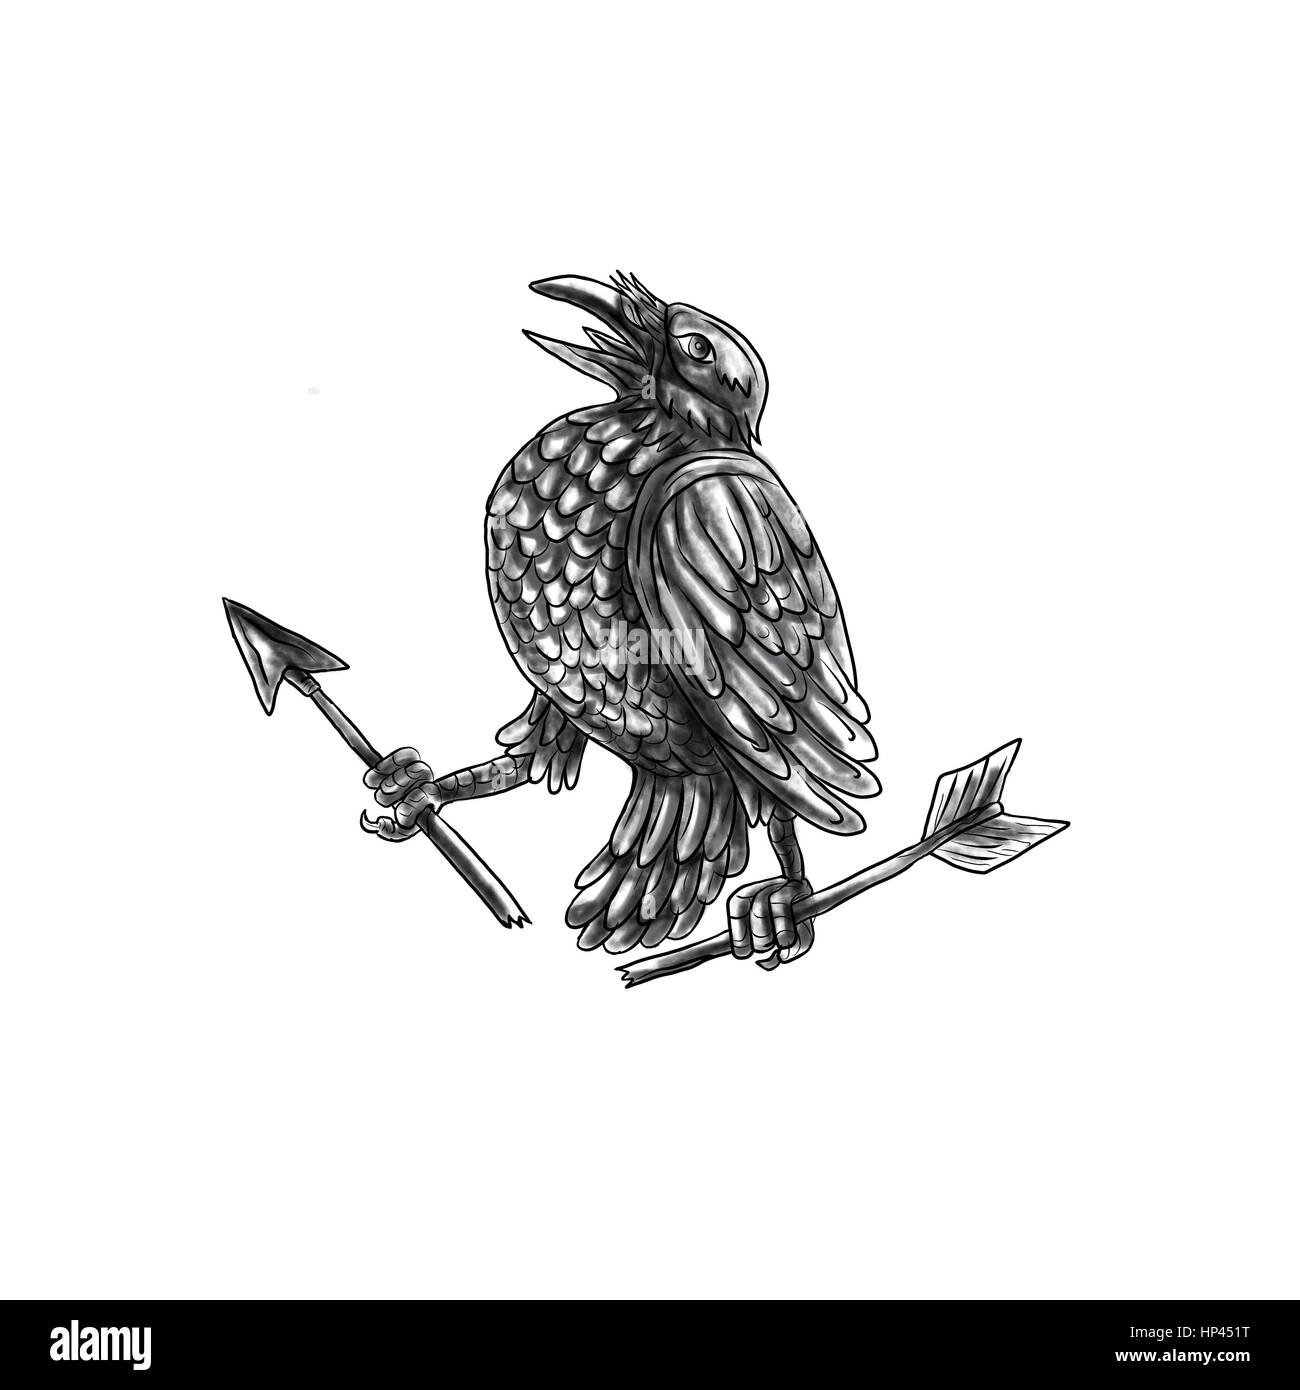 Tattoo style illustration of a crow looking up clutching a broken arrow viewed from the side set on isolated white background. Stock Photo